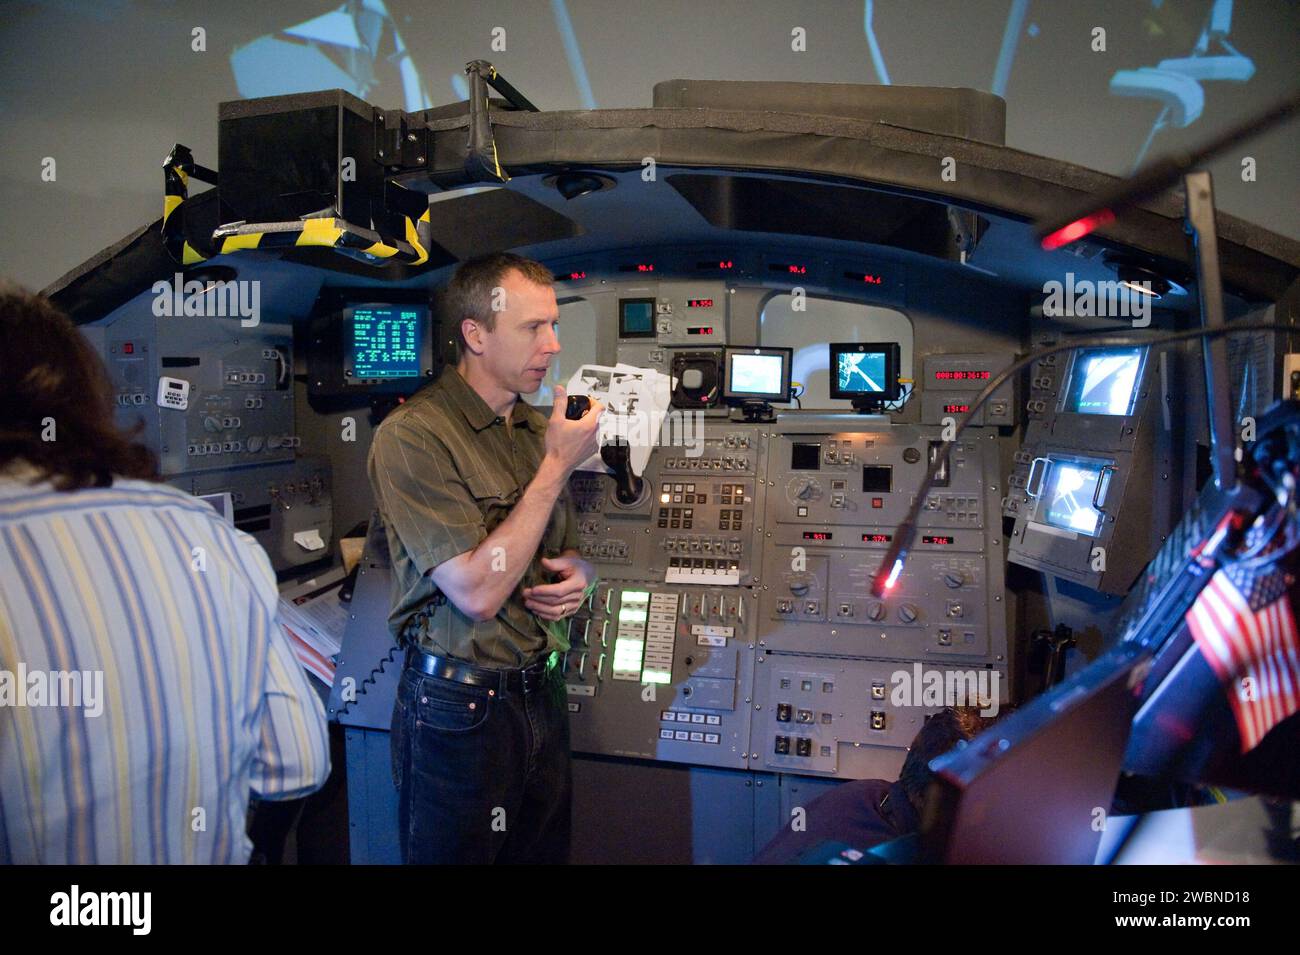 JSC2011-E-028170 (23 March 2011) --- NASA astronaut Andrew Feustel, STS-134 mission specialist, participates in an exercise in the systems engineering simulator in the Avionics Systems Laboratory at NASA's Johnson Space Center. The facility includes moving scenes of full-sized International Space Station components over a simulated Earth. Stock Photo